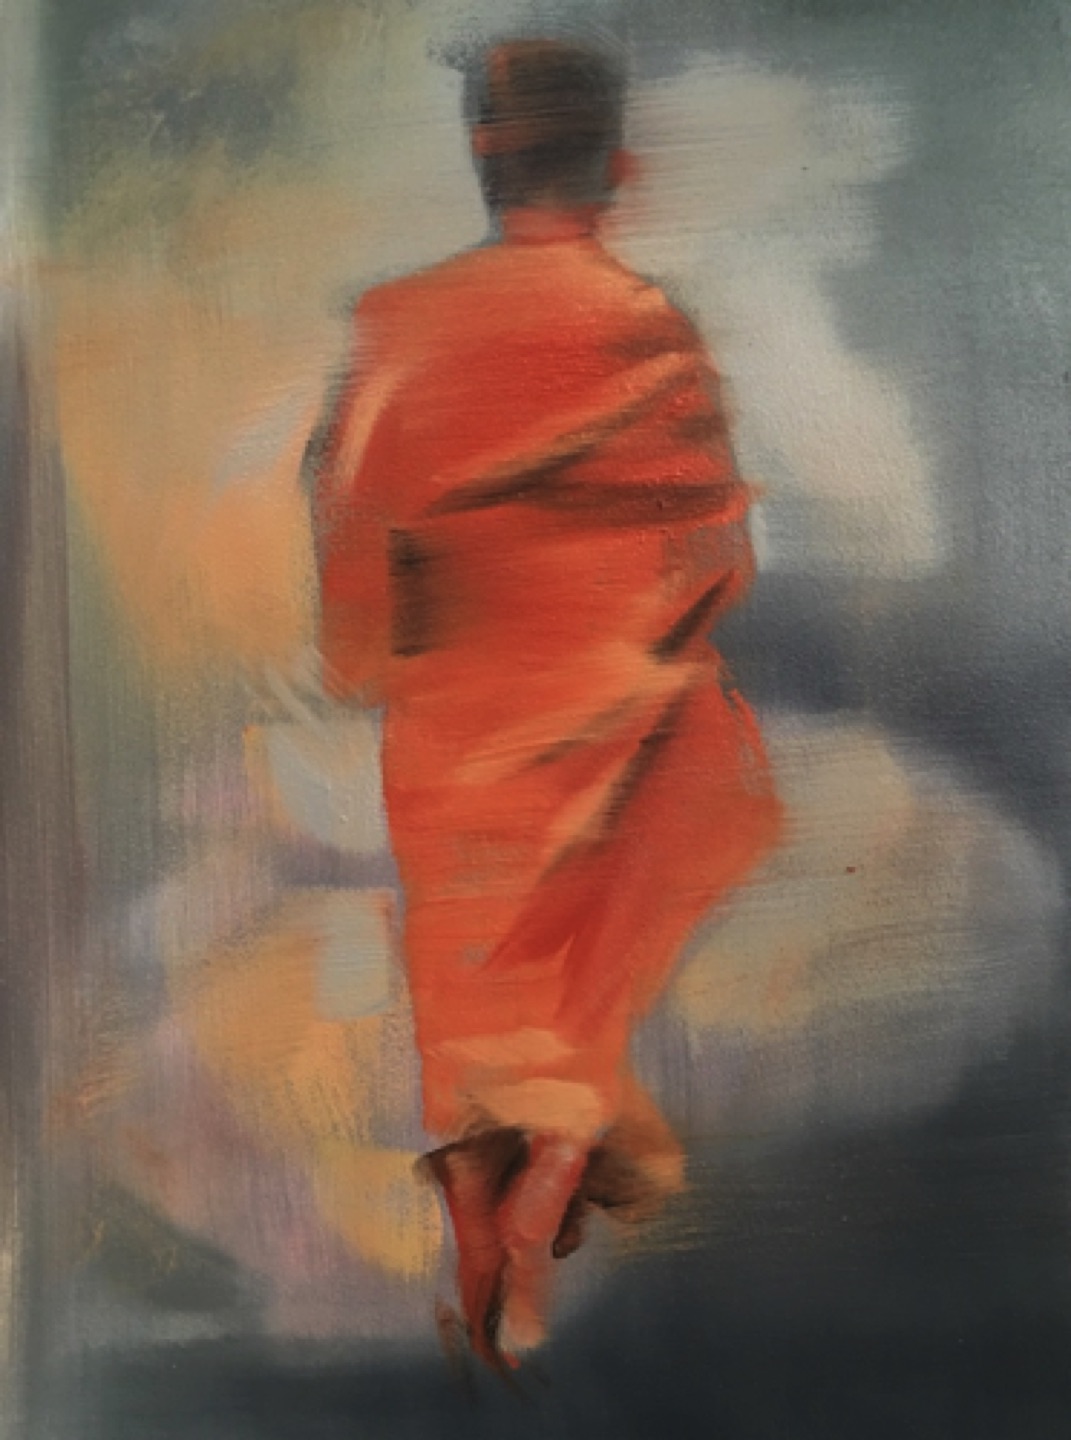 Gregg Chadwick 
Buddha of Roseburg
8"x6" oil on panel 2015
Exhibited and Sold at Art & Home: An Evening with LA Family Housing to benefit LA Family Housing.
October 21, 2015 7-9pm